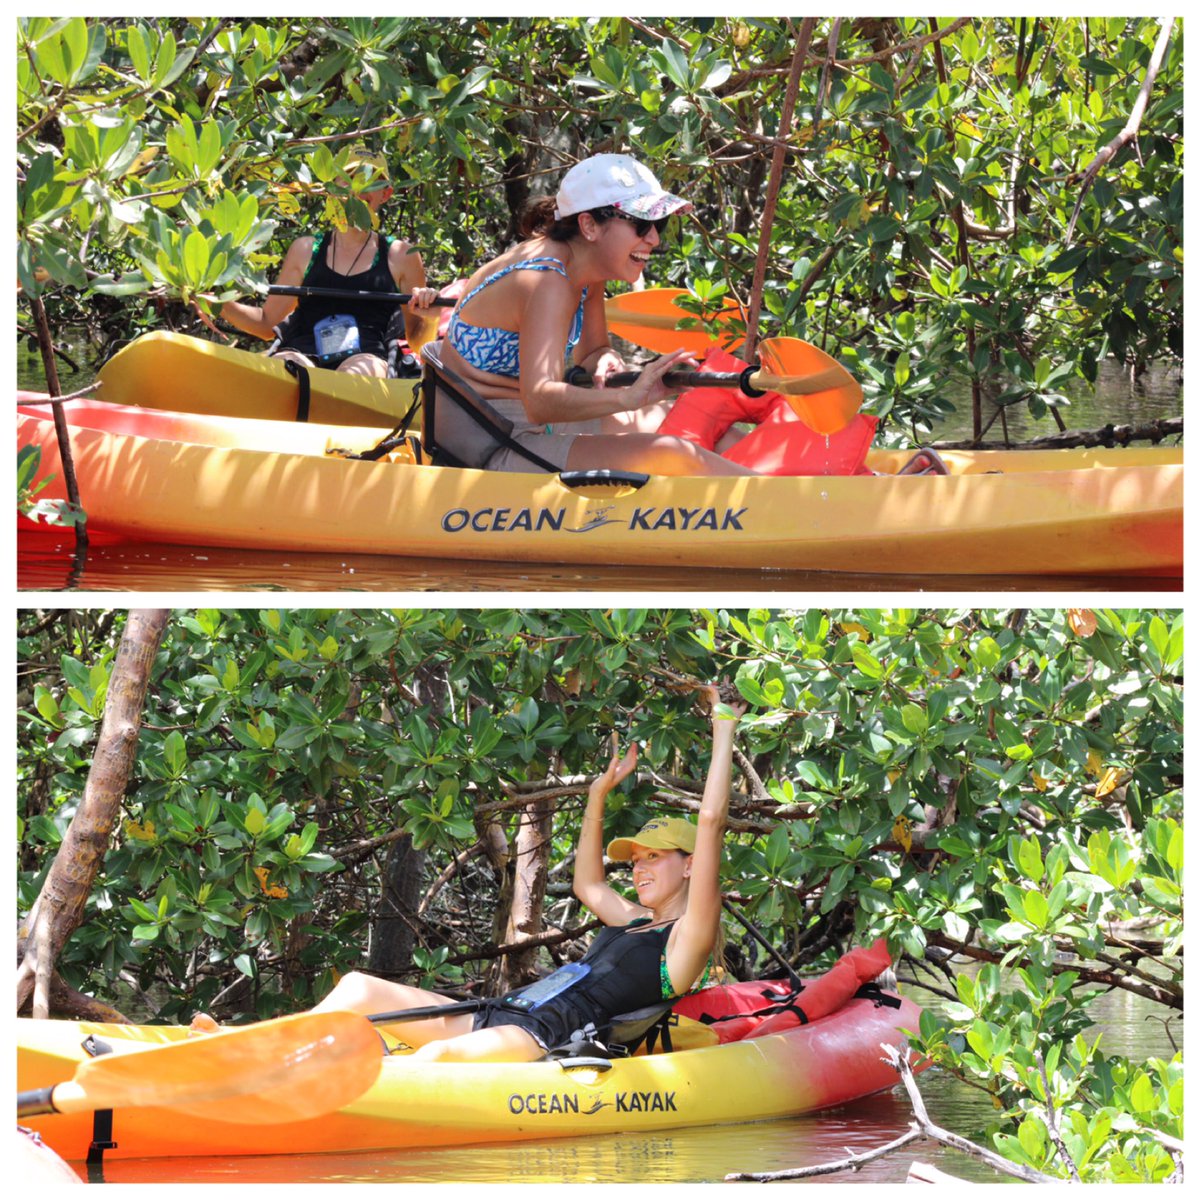 We know how much everyone loves math, so here is a math problem for you… What does high tide + mangroves equal? Mangrove limbo!!! #kayaking #mangroves #allsmiles #getoutside #girlpower #naplesflorida #kayak #marcoisland #lovefl #limbo #howlowcanyougo #math